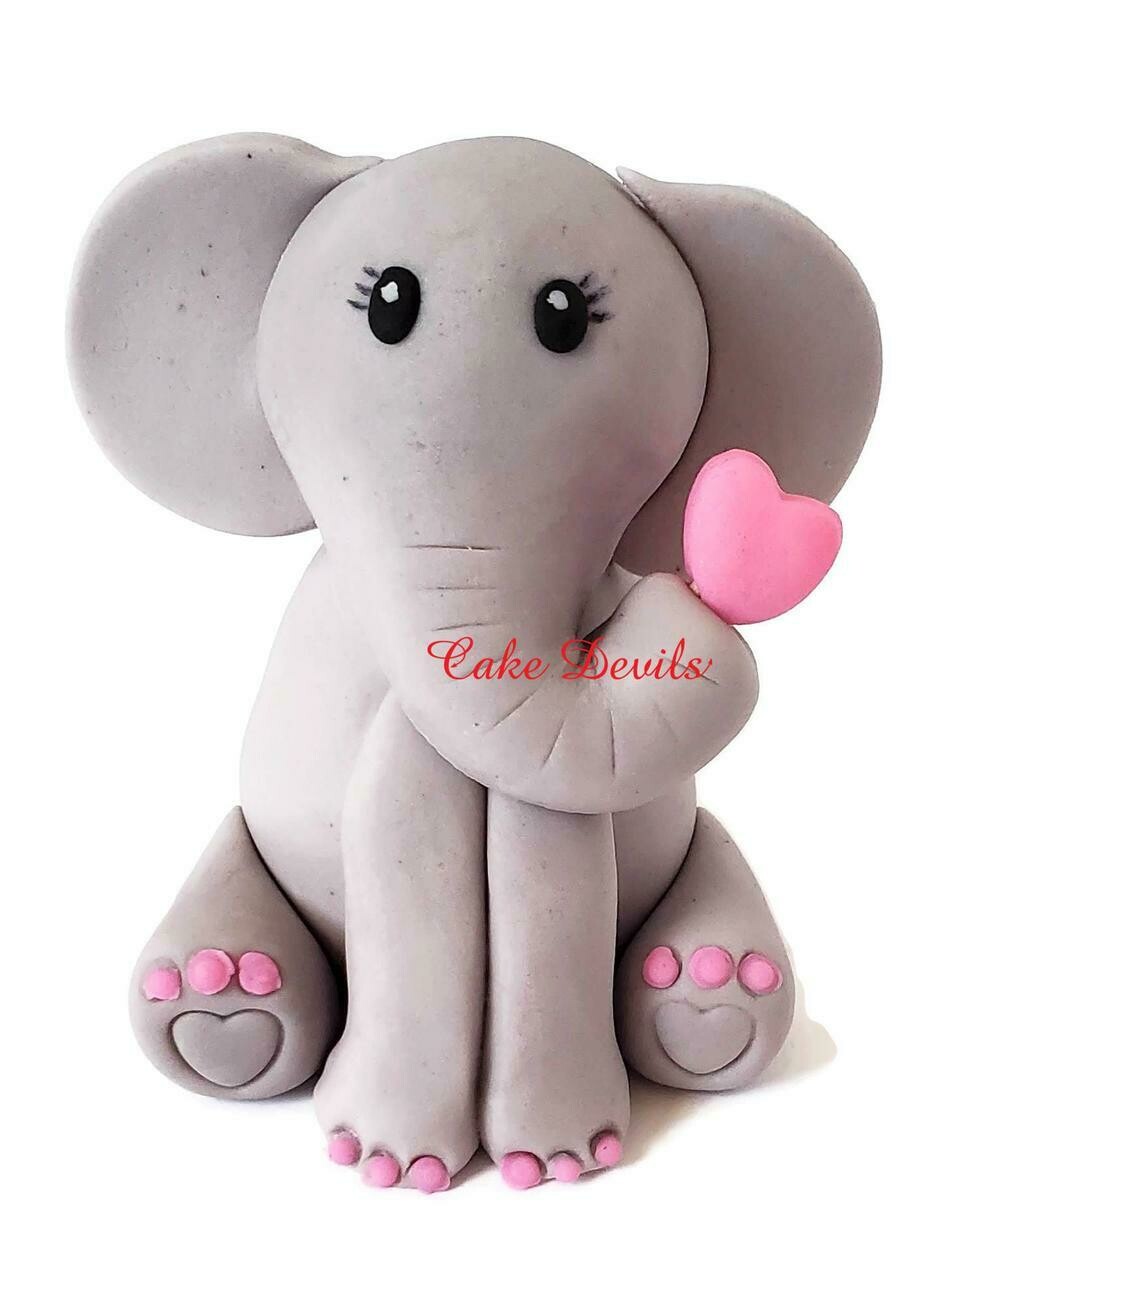 Fondant Elephant Cake Topper with Heart in trunk